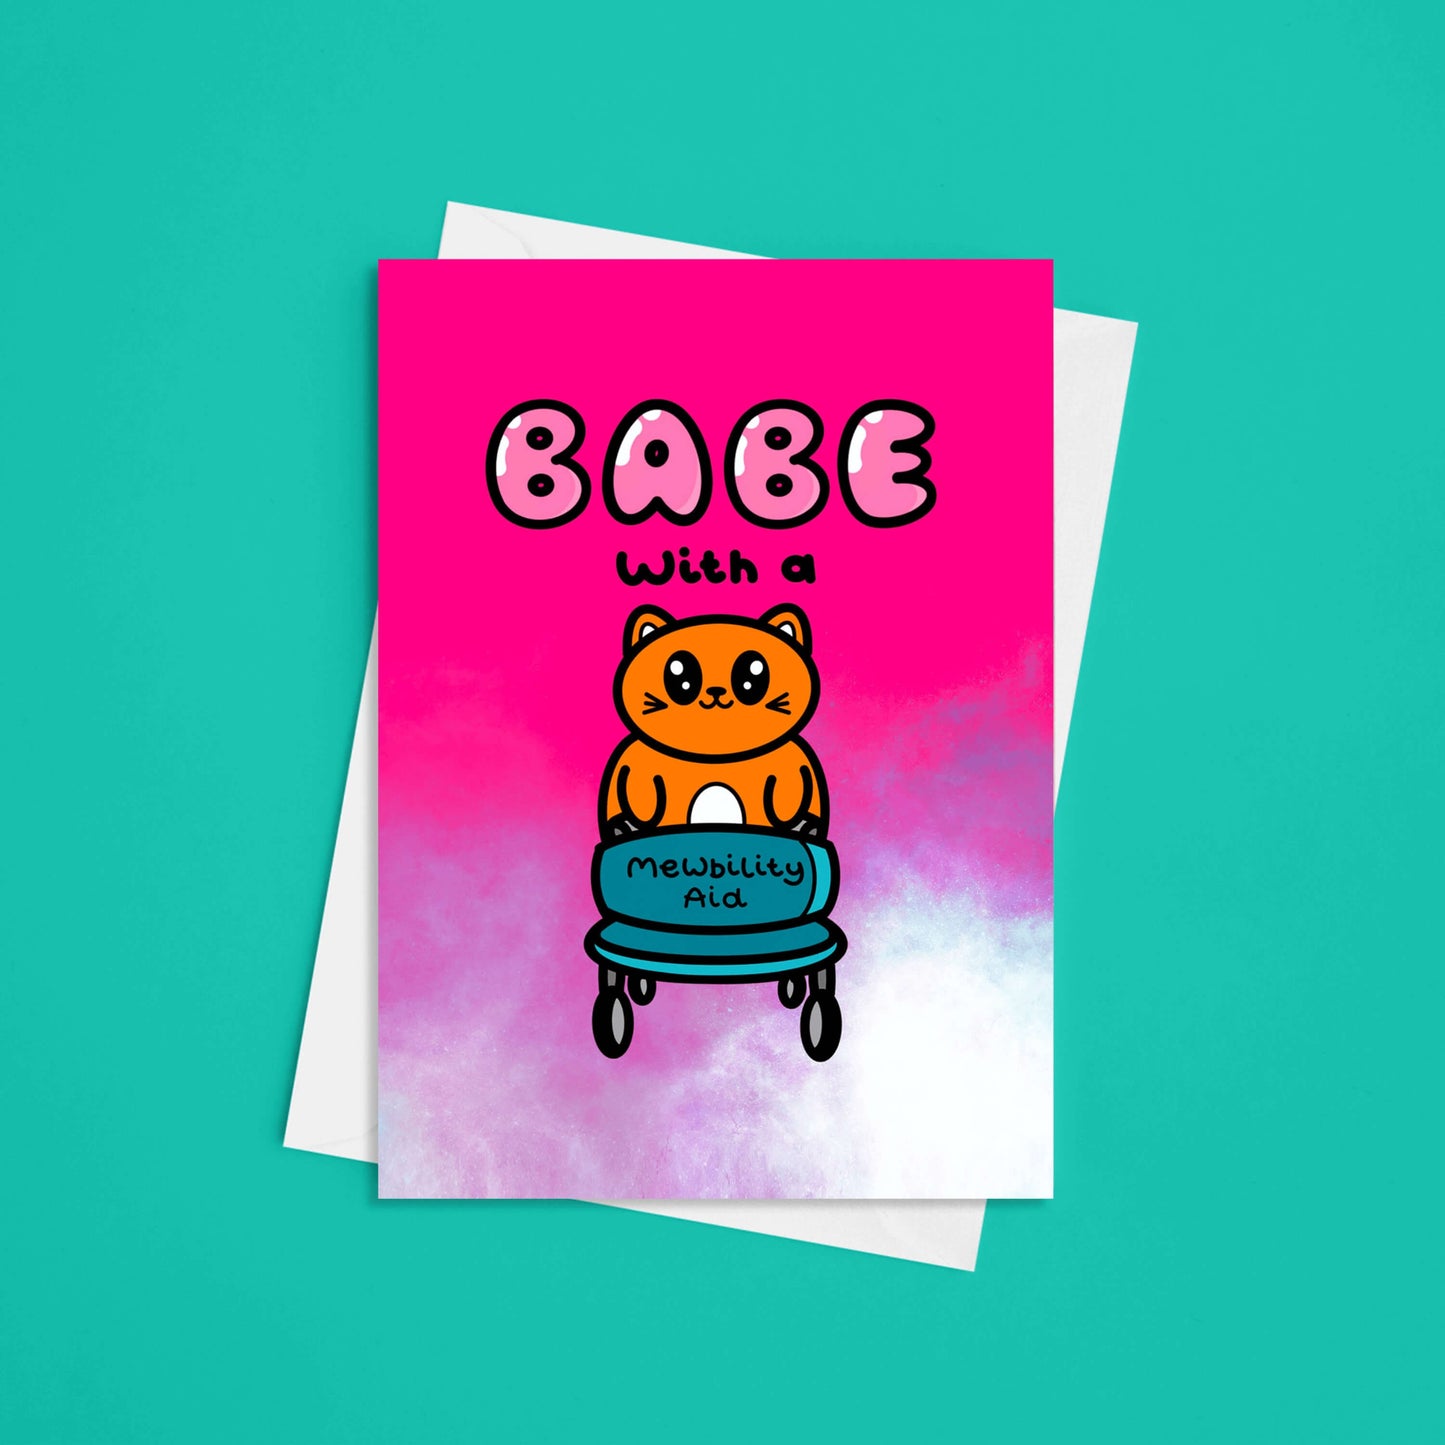 A hot pink and white greeting card with a cute ginger cat holding a blue mobility aid. 'Babe with a mewbility aid' is written on the card. The cards pairing white envelope is sat underneath the card. The background of the photo is blue. Design inspired by disabilities and chronic illness.